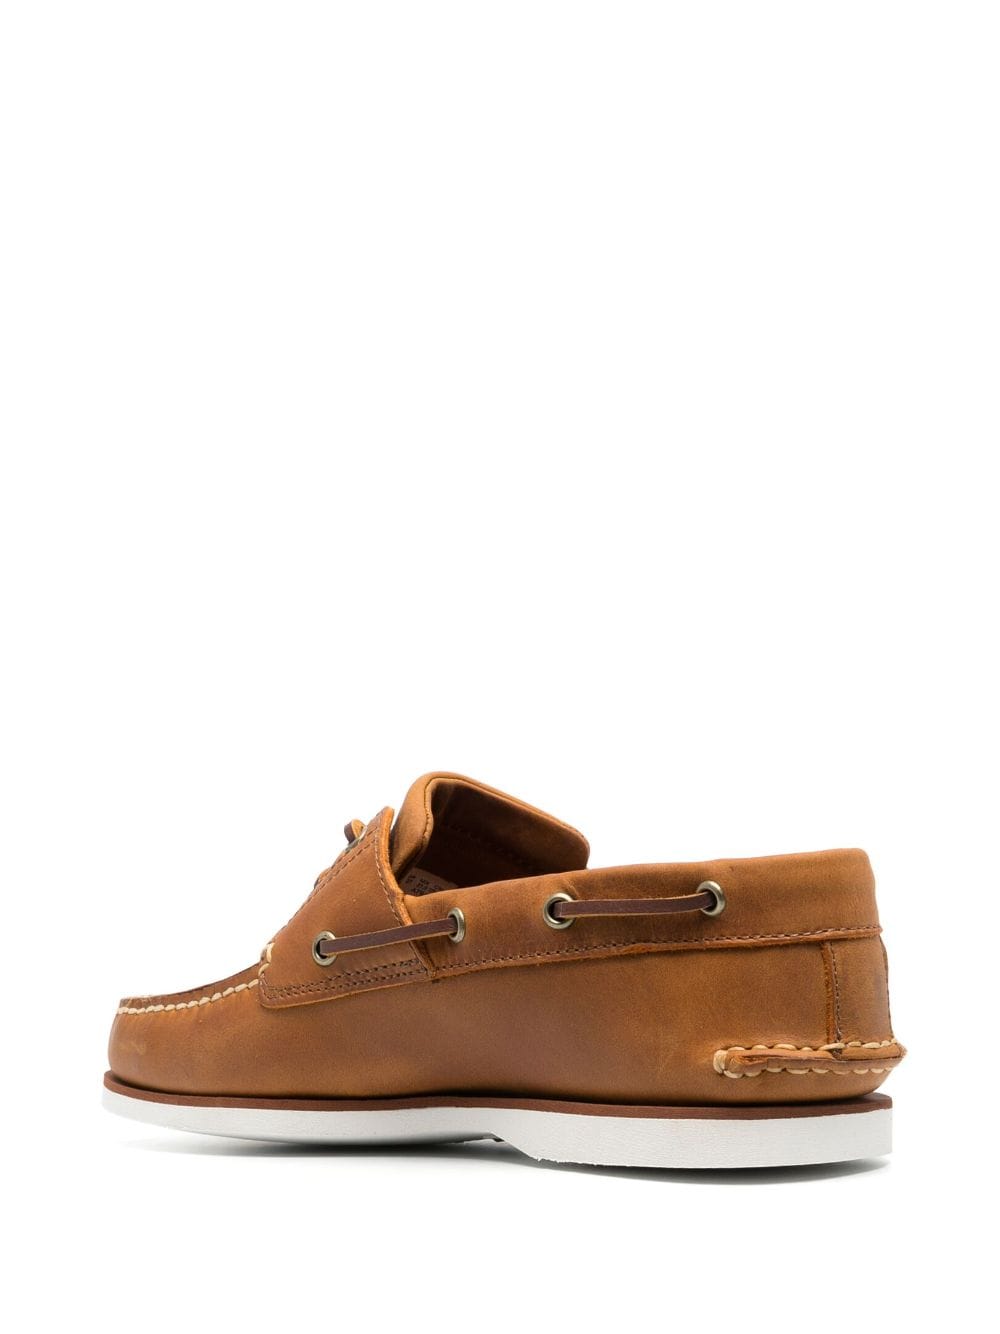 Front logo loafers